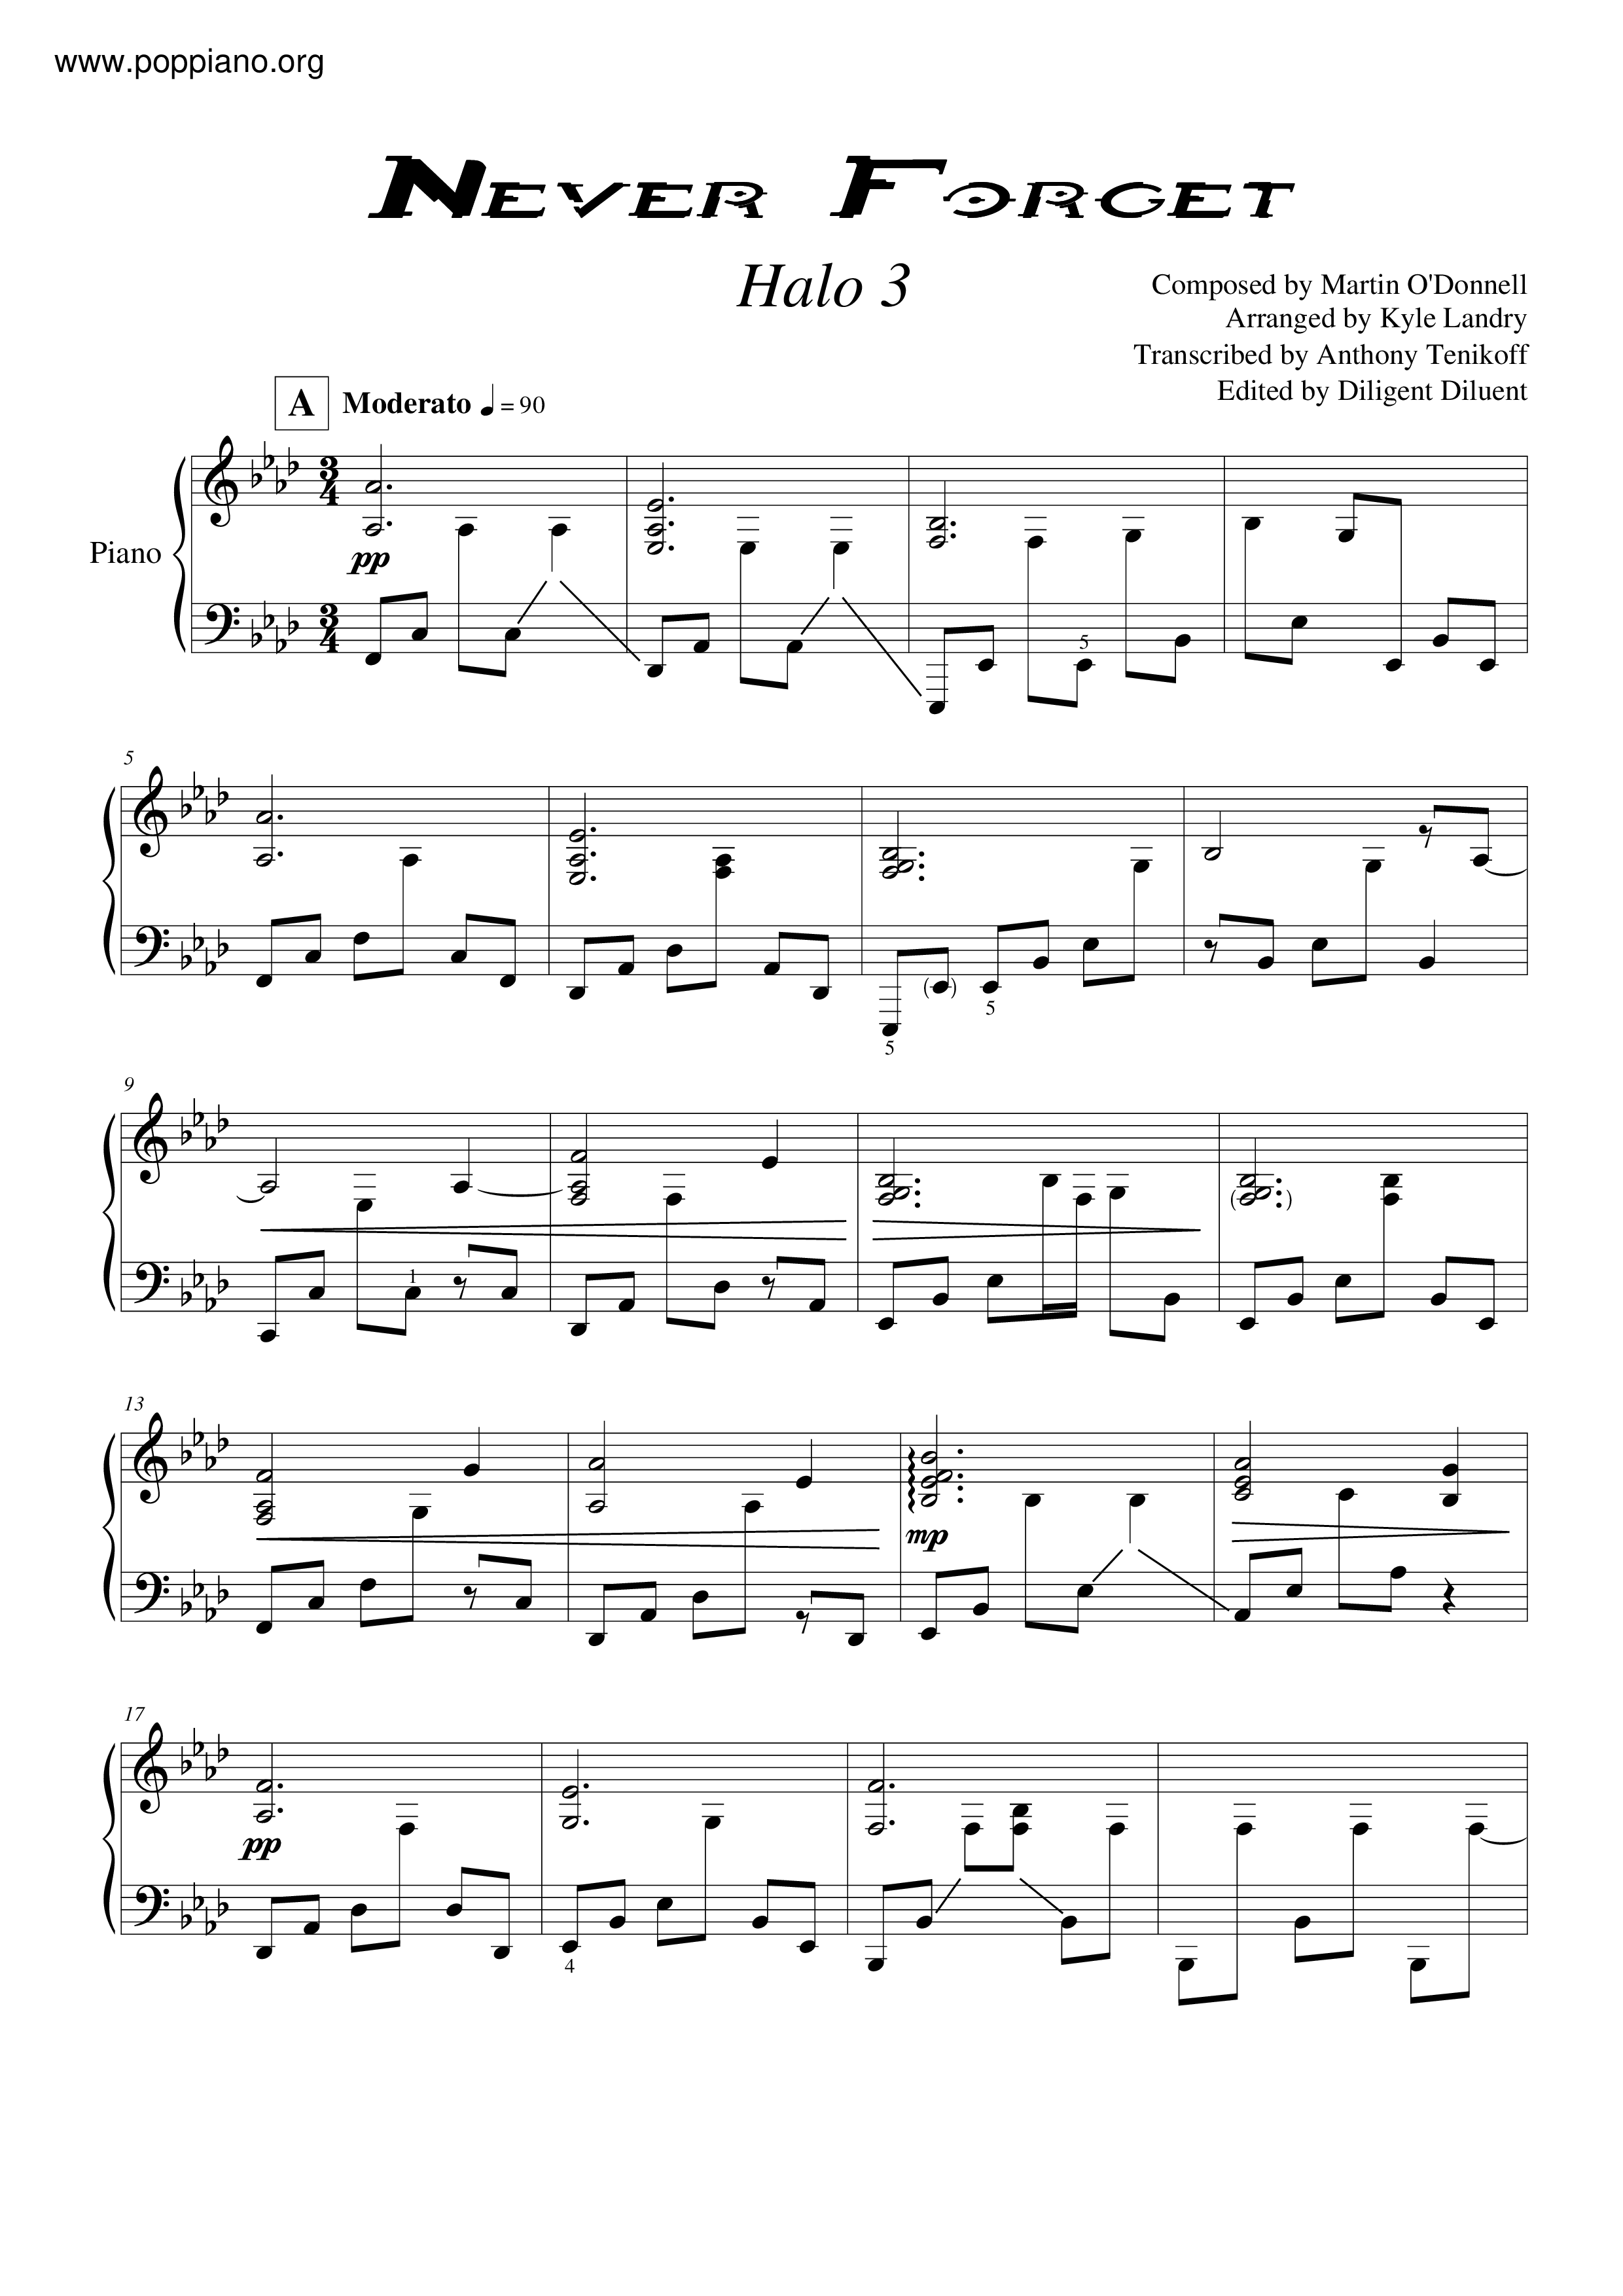 Tiny Dignified pad ☆ Game-Halo 3 - Never Forget Sheet Music pdf, (ビデオゲームの歌) - Free Score  Download ☆